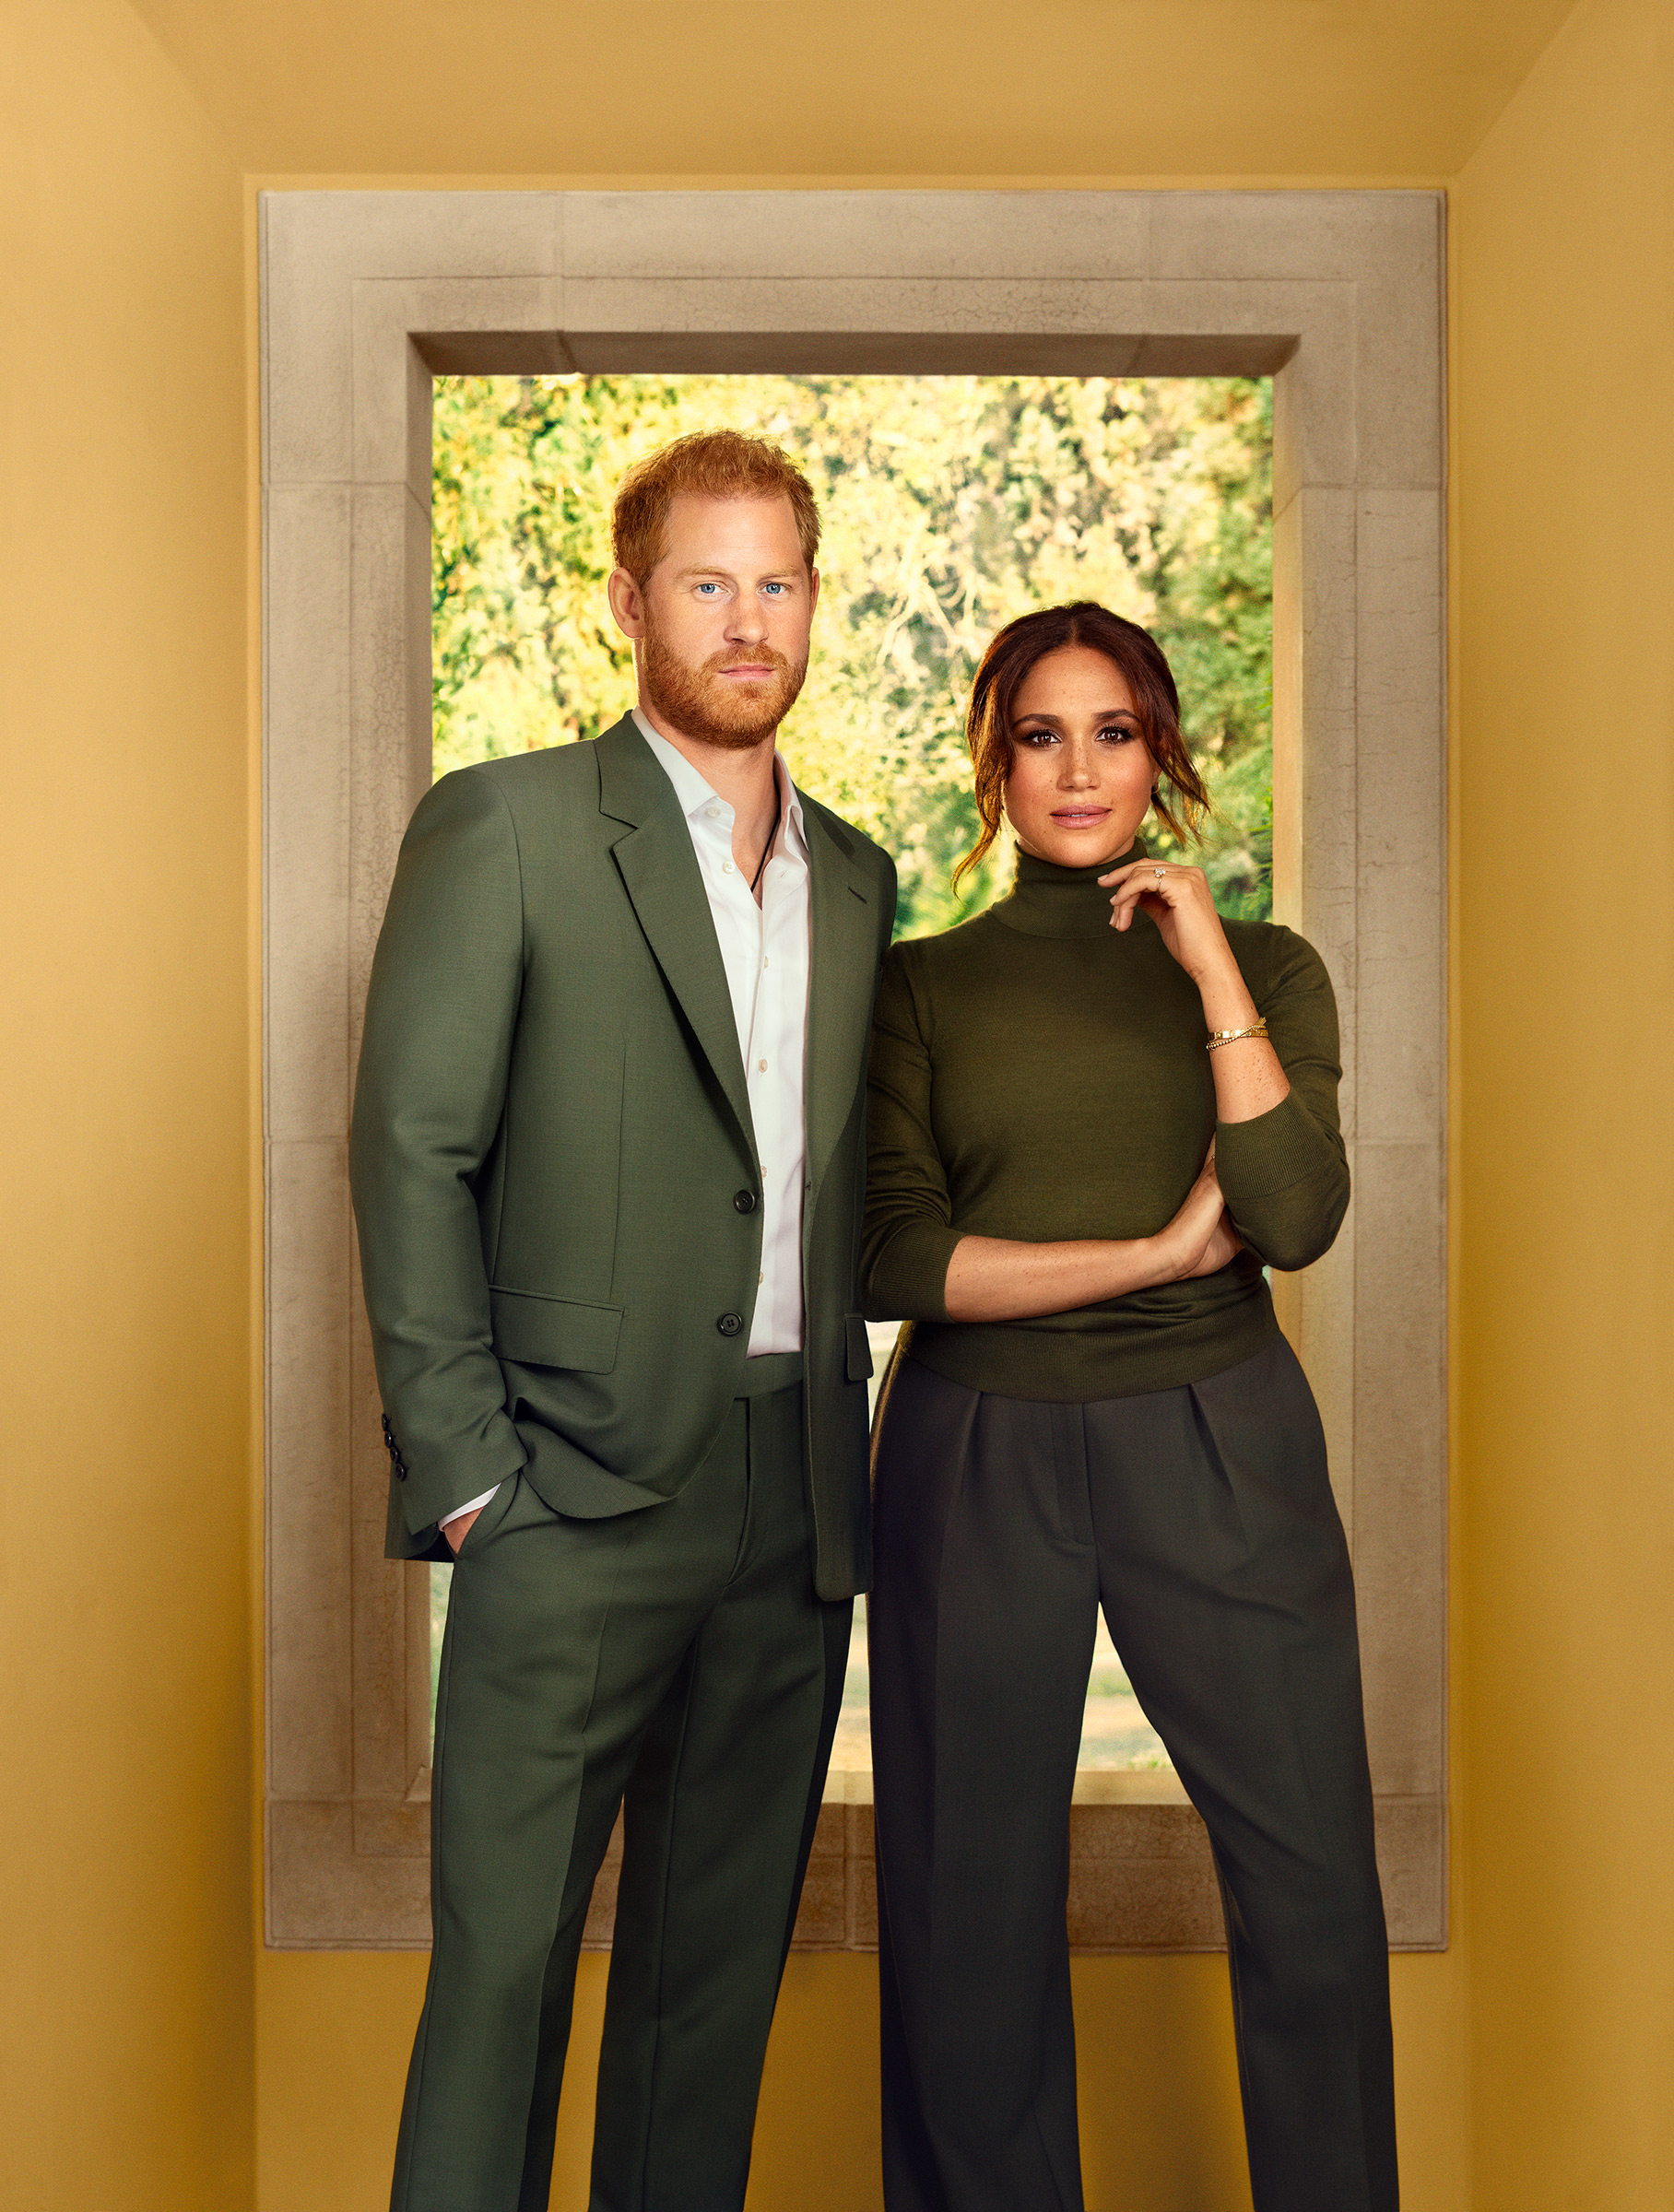 Prince Harry and Meghan Are on the 2021 TIME100 List | TIME